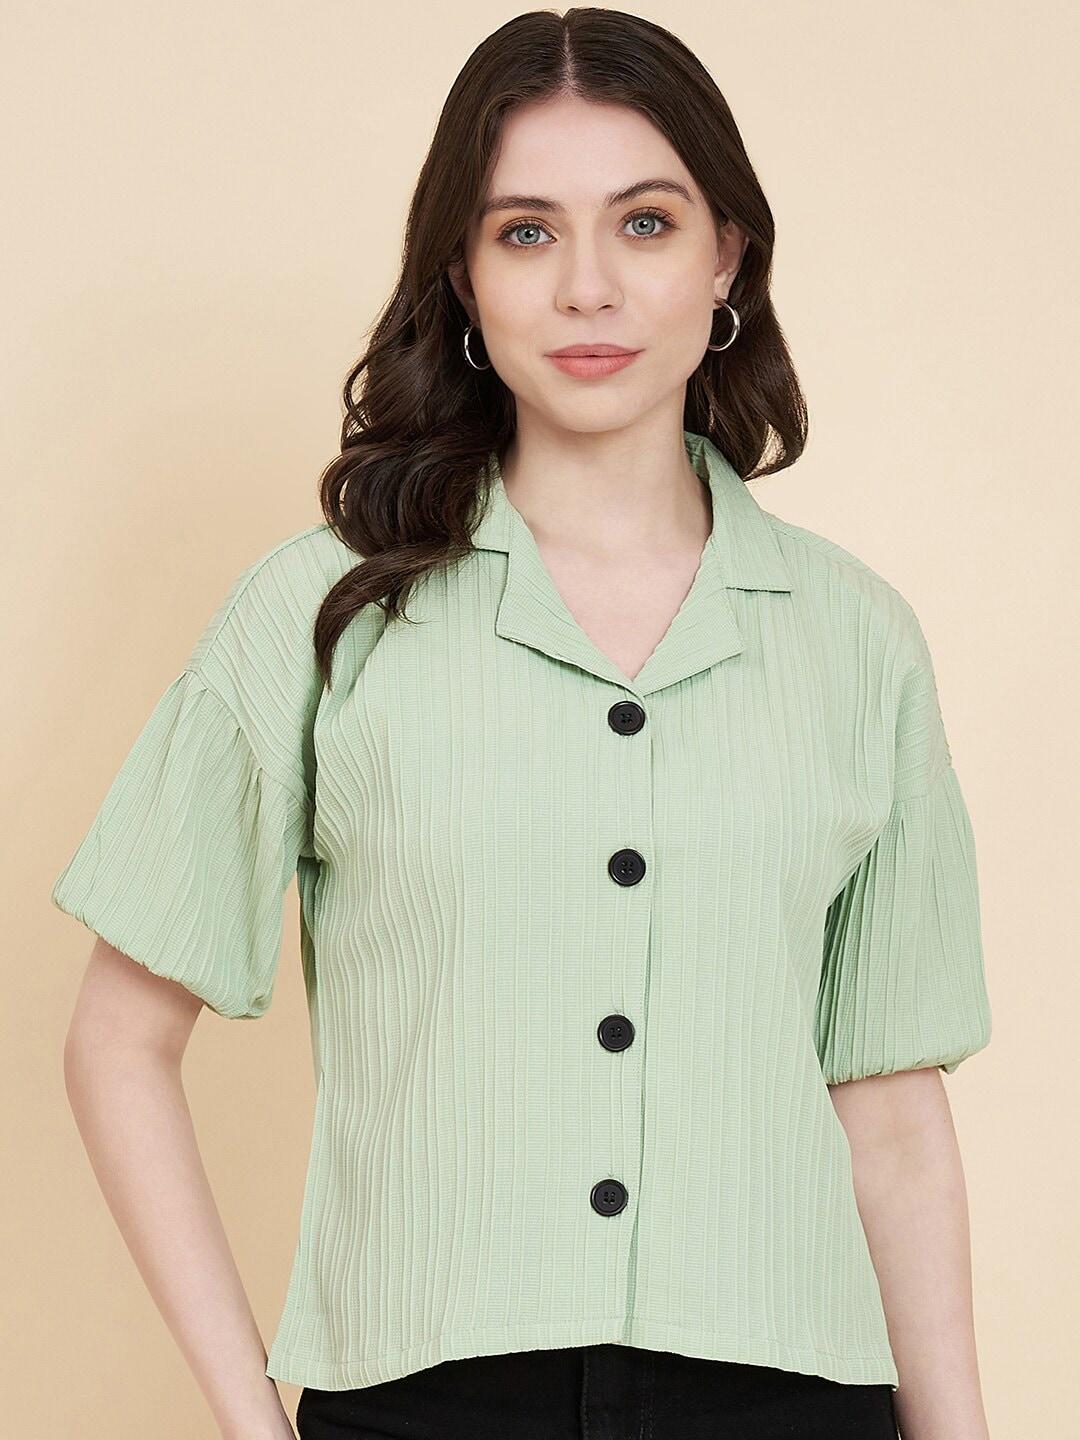 VAIRAGEE Women Olive Green Classic Boxy Striped Casual Shirt